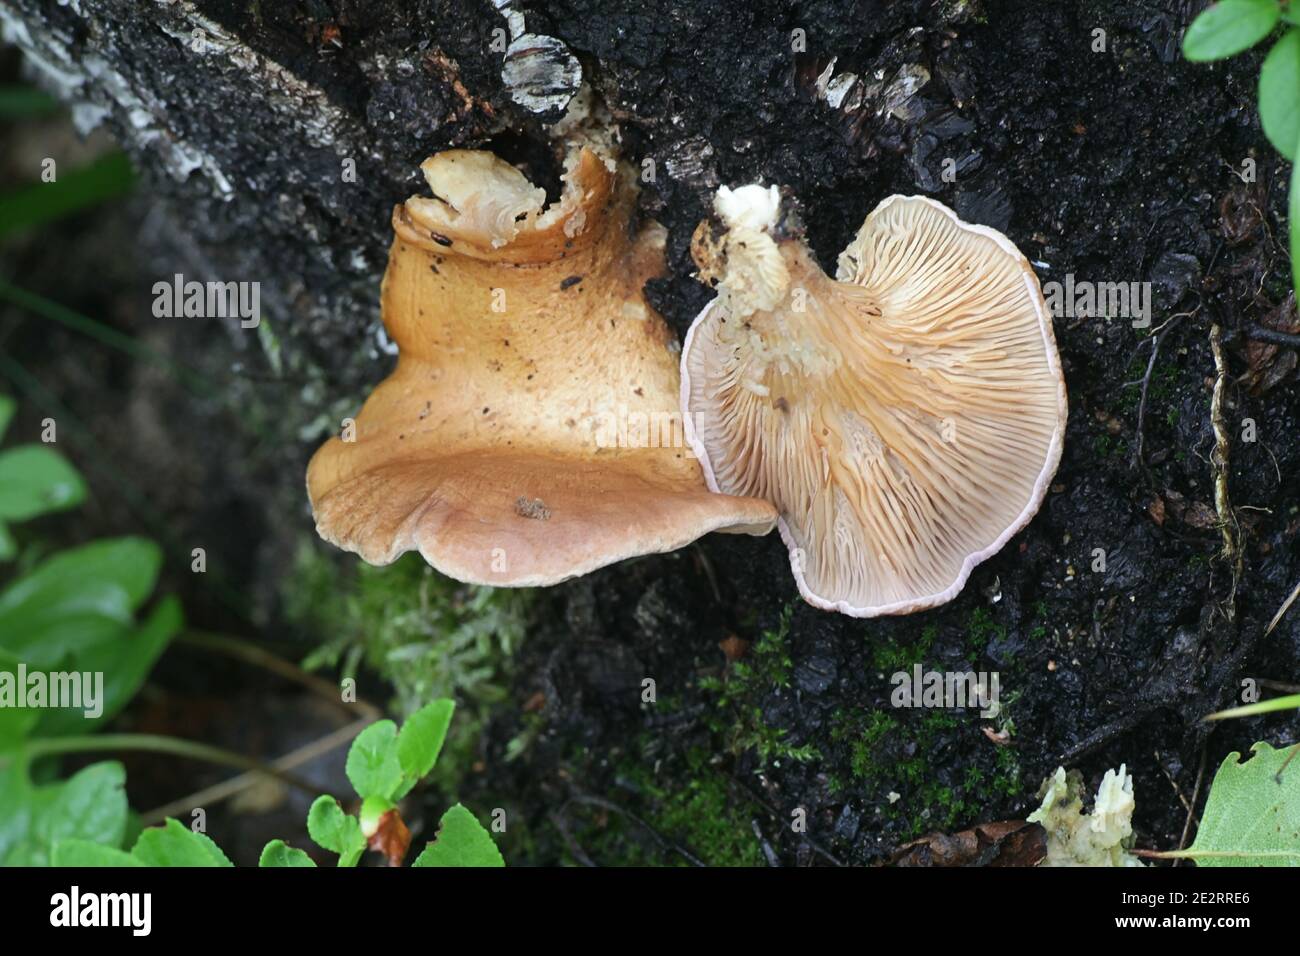 Lentinus conchatus, also called Panus conchatus, commonly known as the lilac oysterling, wild mushroom from Finland Stock Photo